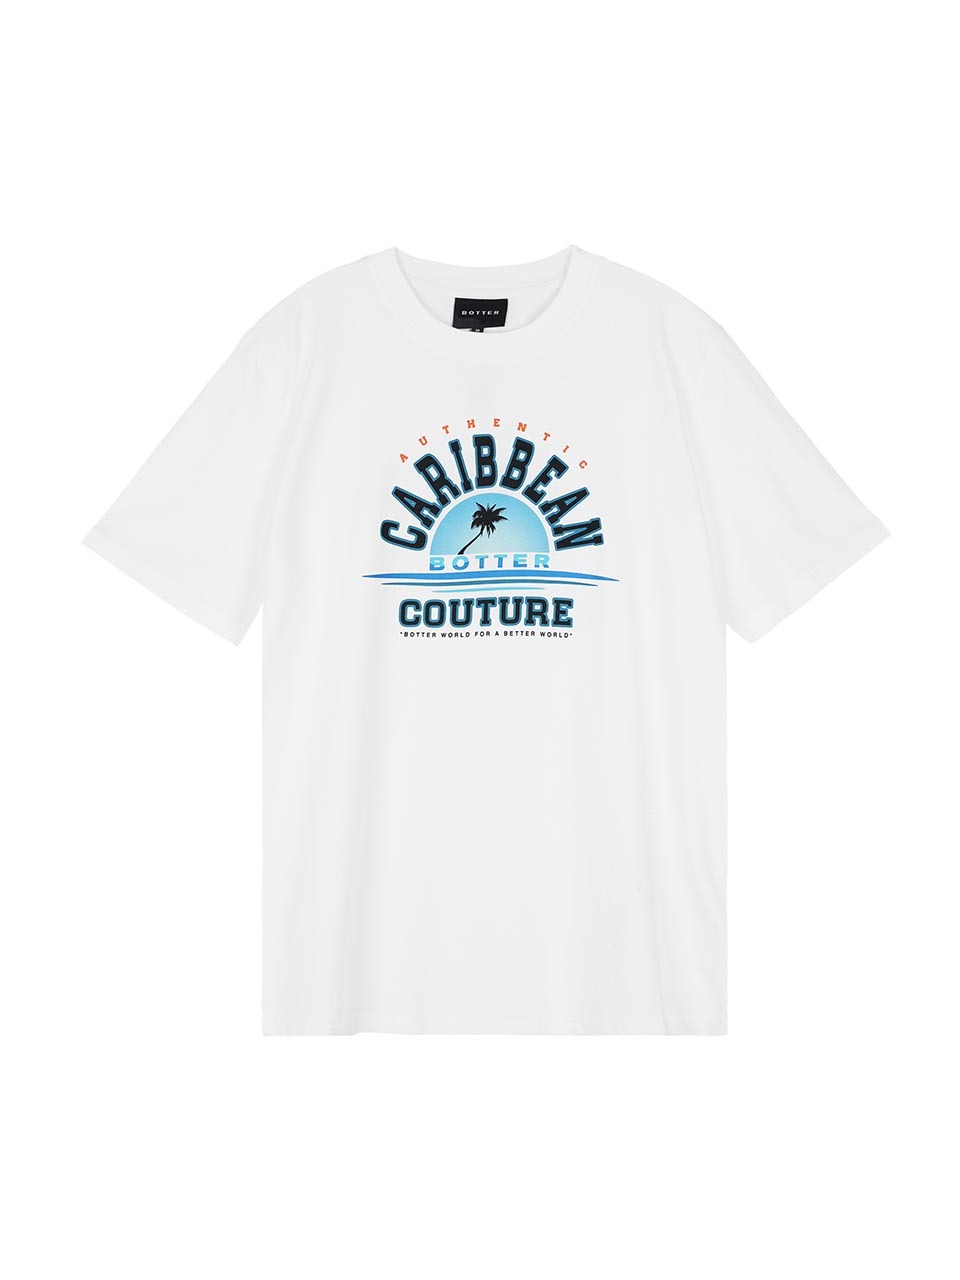 BOTTER - CLASSIC CARIBBEAN COUTURE T SHIRT (WHITE)